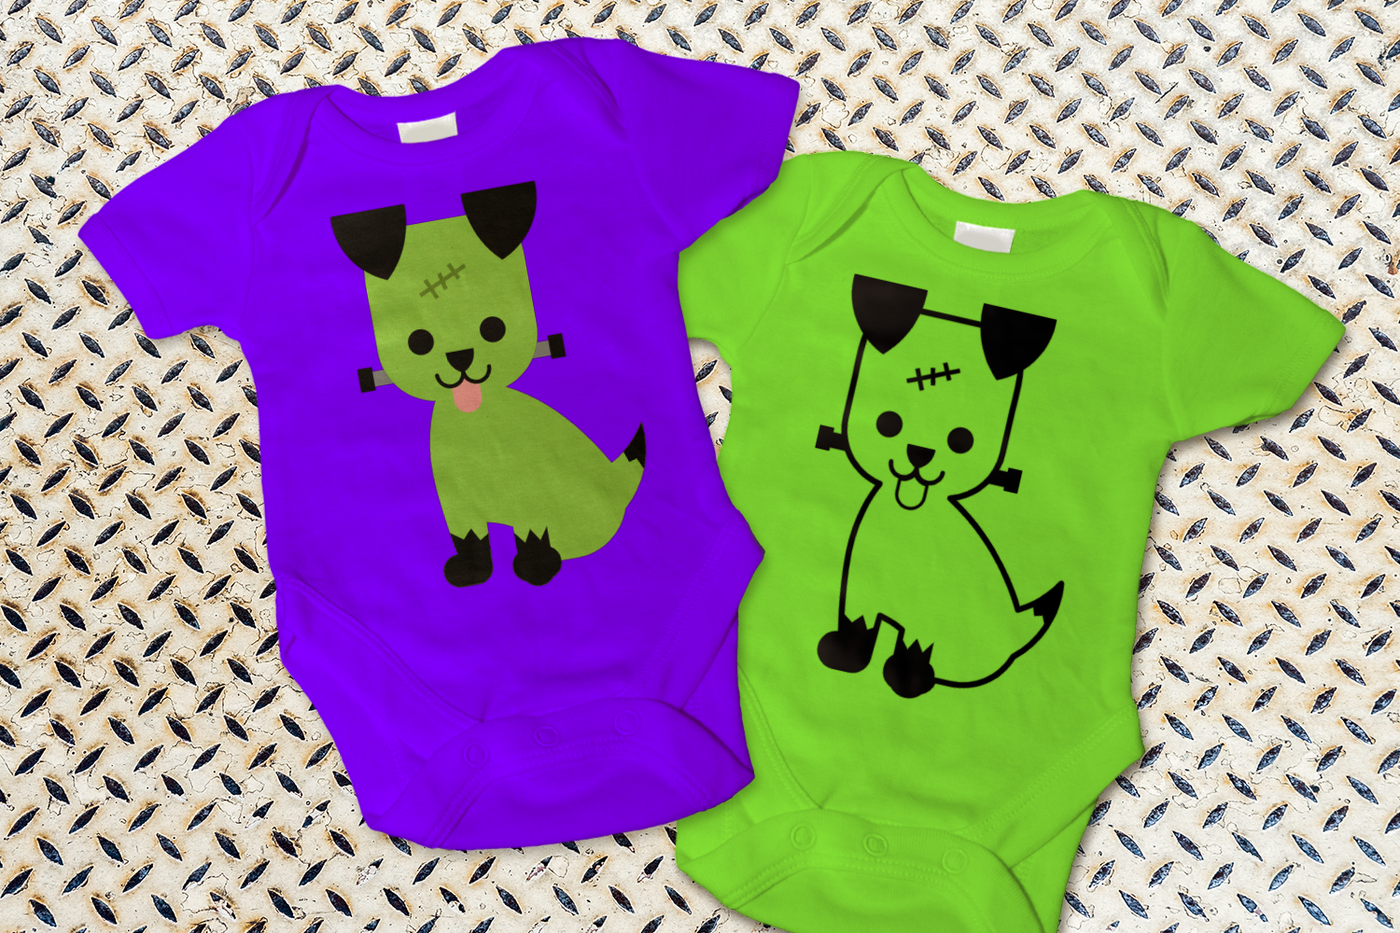 Two baby onesies, each with a puppy that is dressed up like Frankenstein's monster.